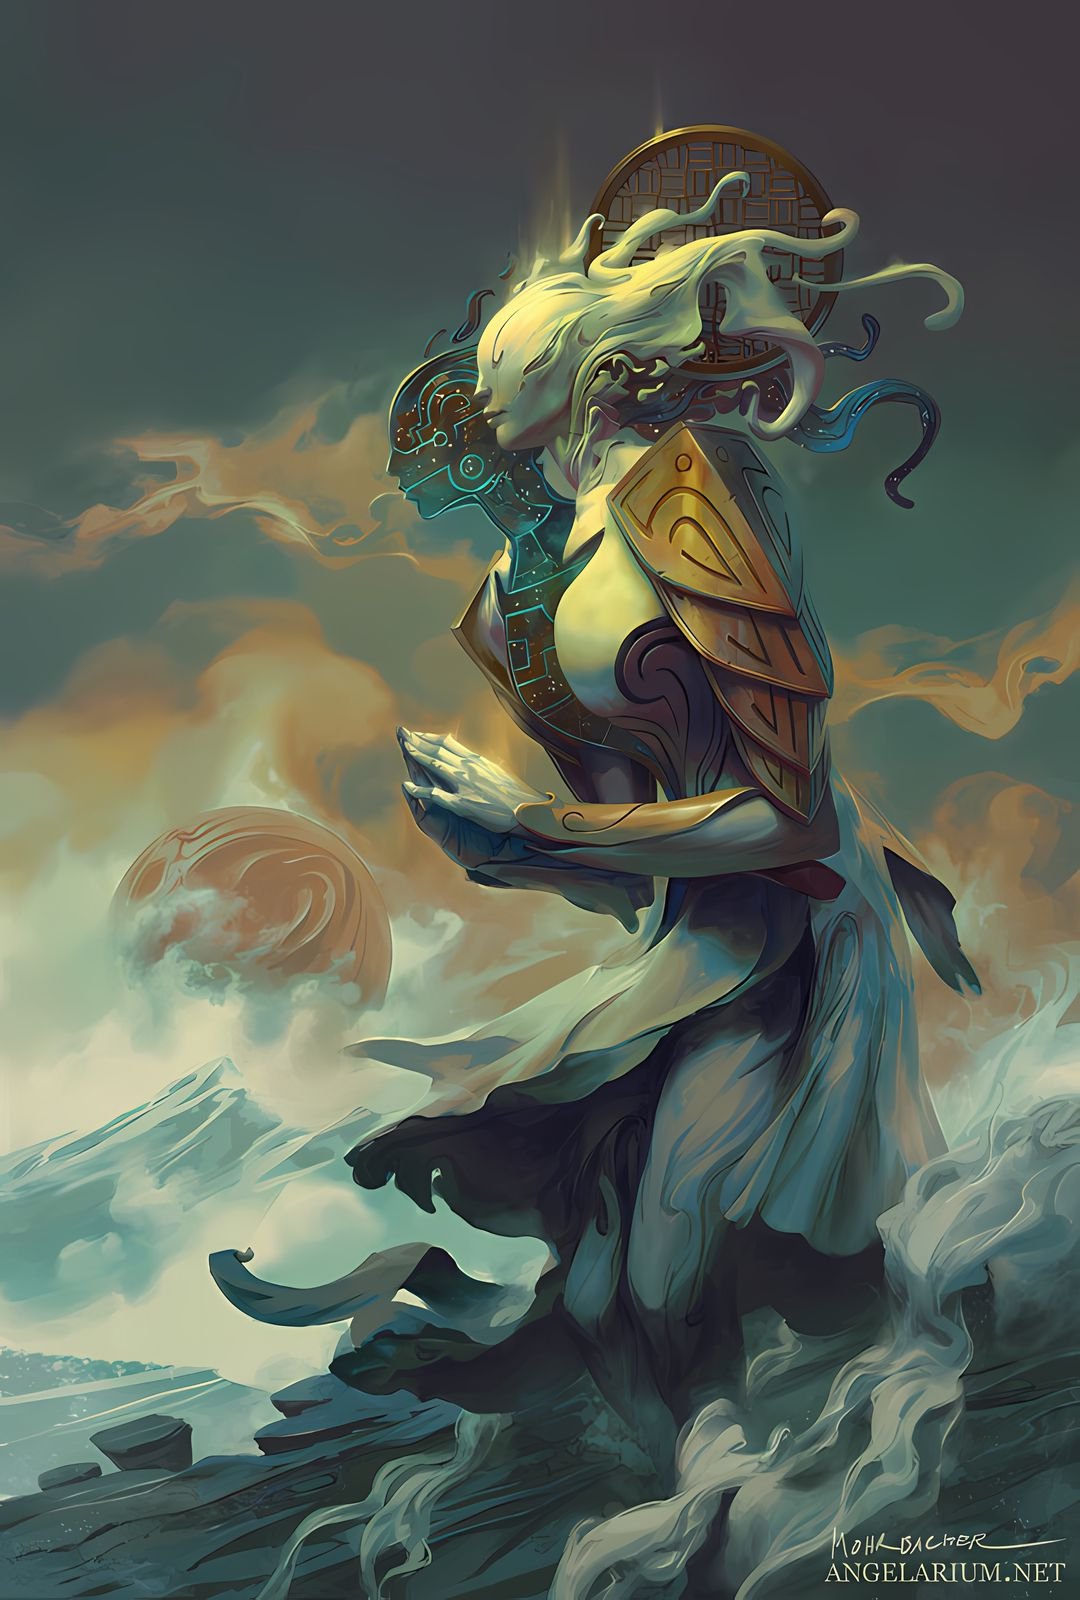 Peter Mohrbacher Blends Surrealism With Fantasy To Create Powerful Magical Beings (4)